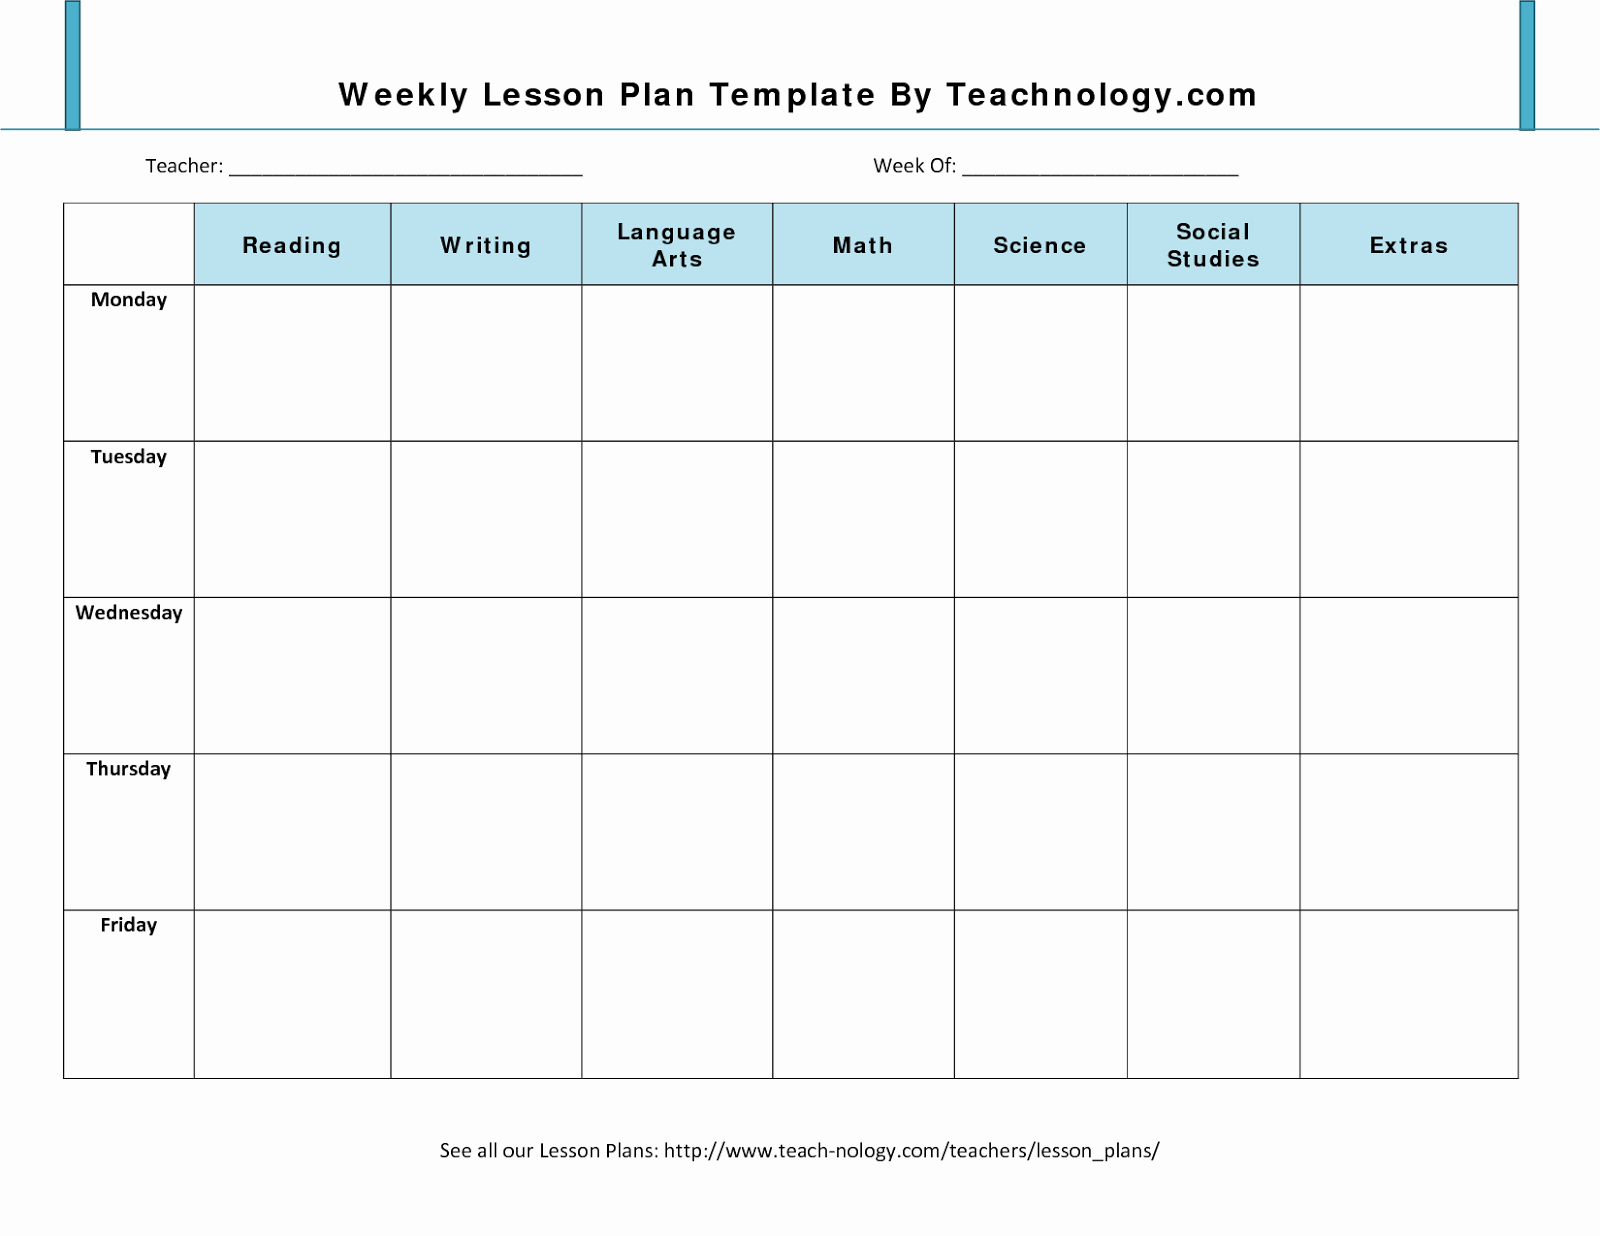 Weekly Lesson Plan Template Word Inspirational Teacher Lesson Plan Template Word Happy Memorial Day 2014